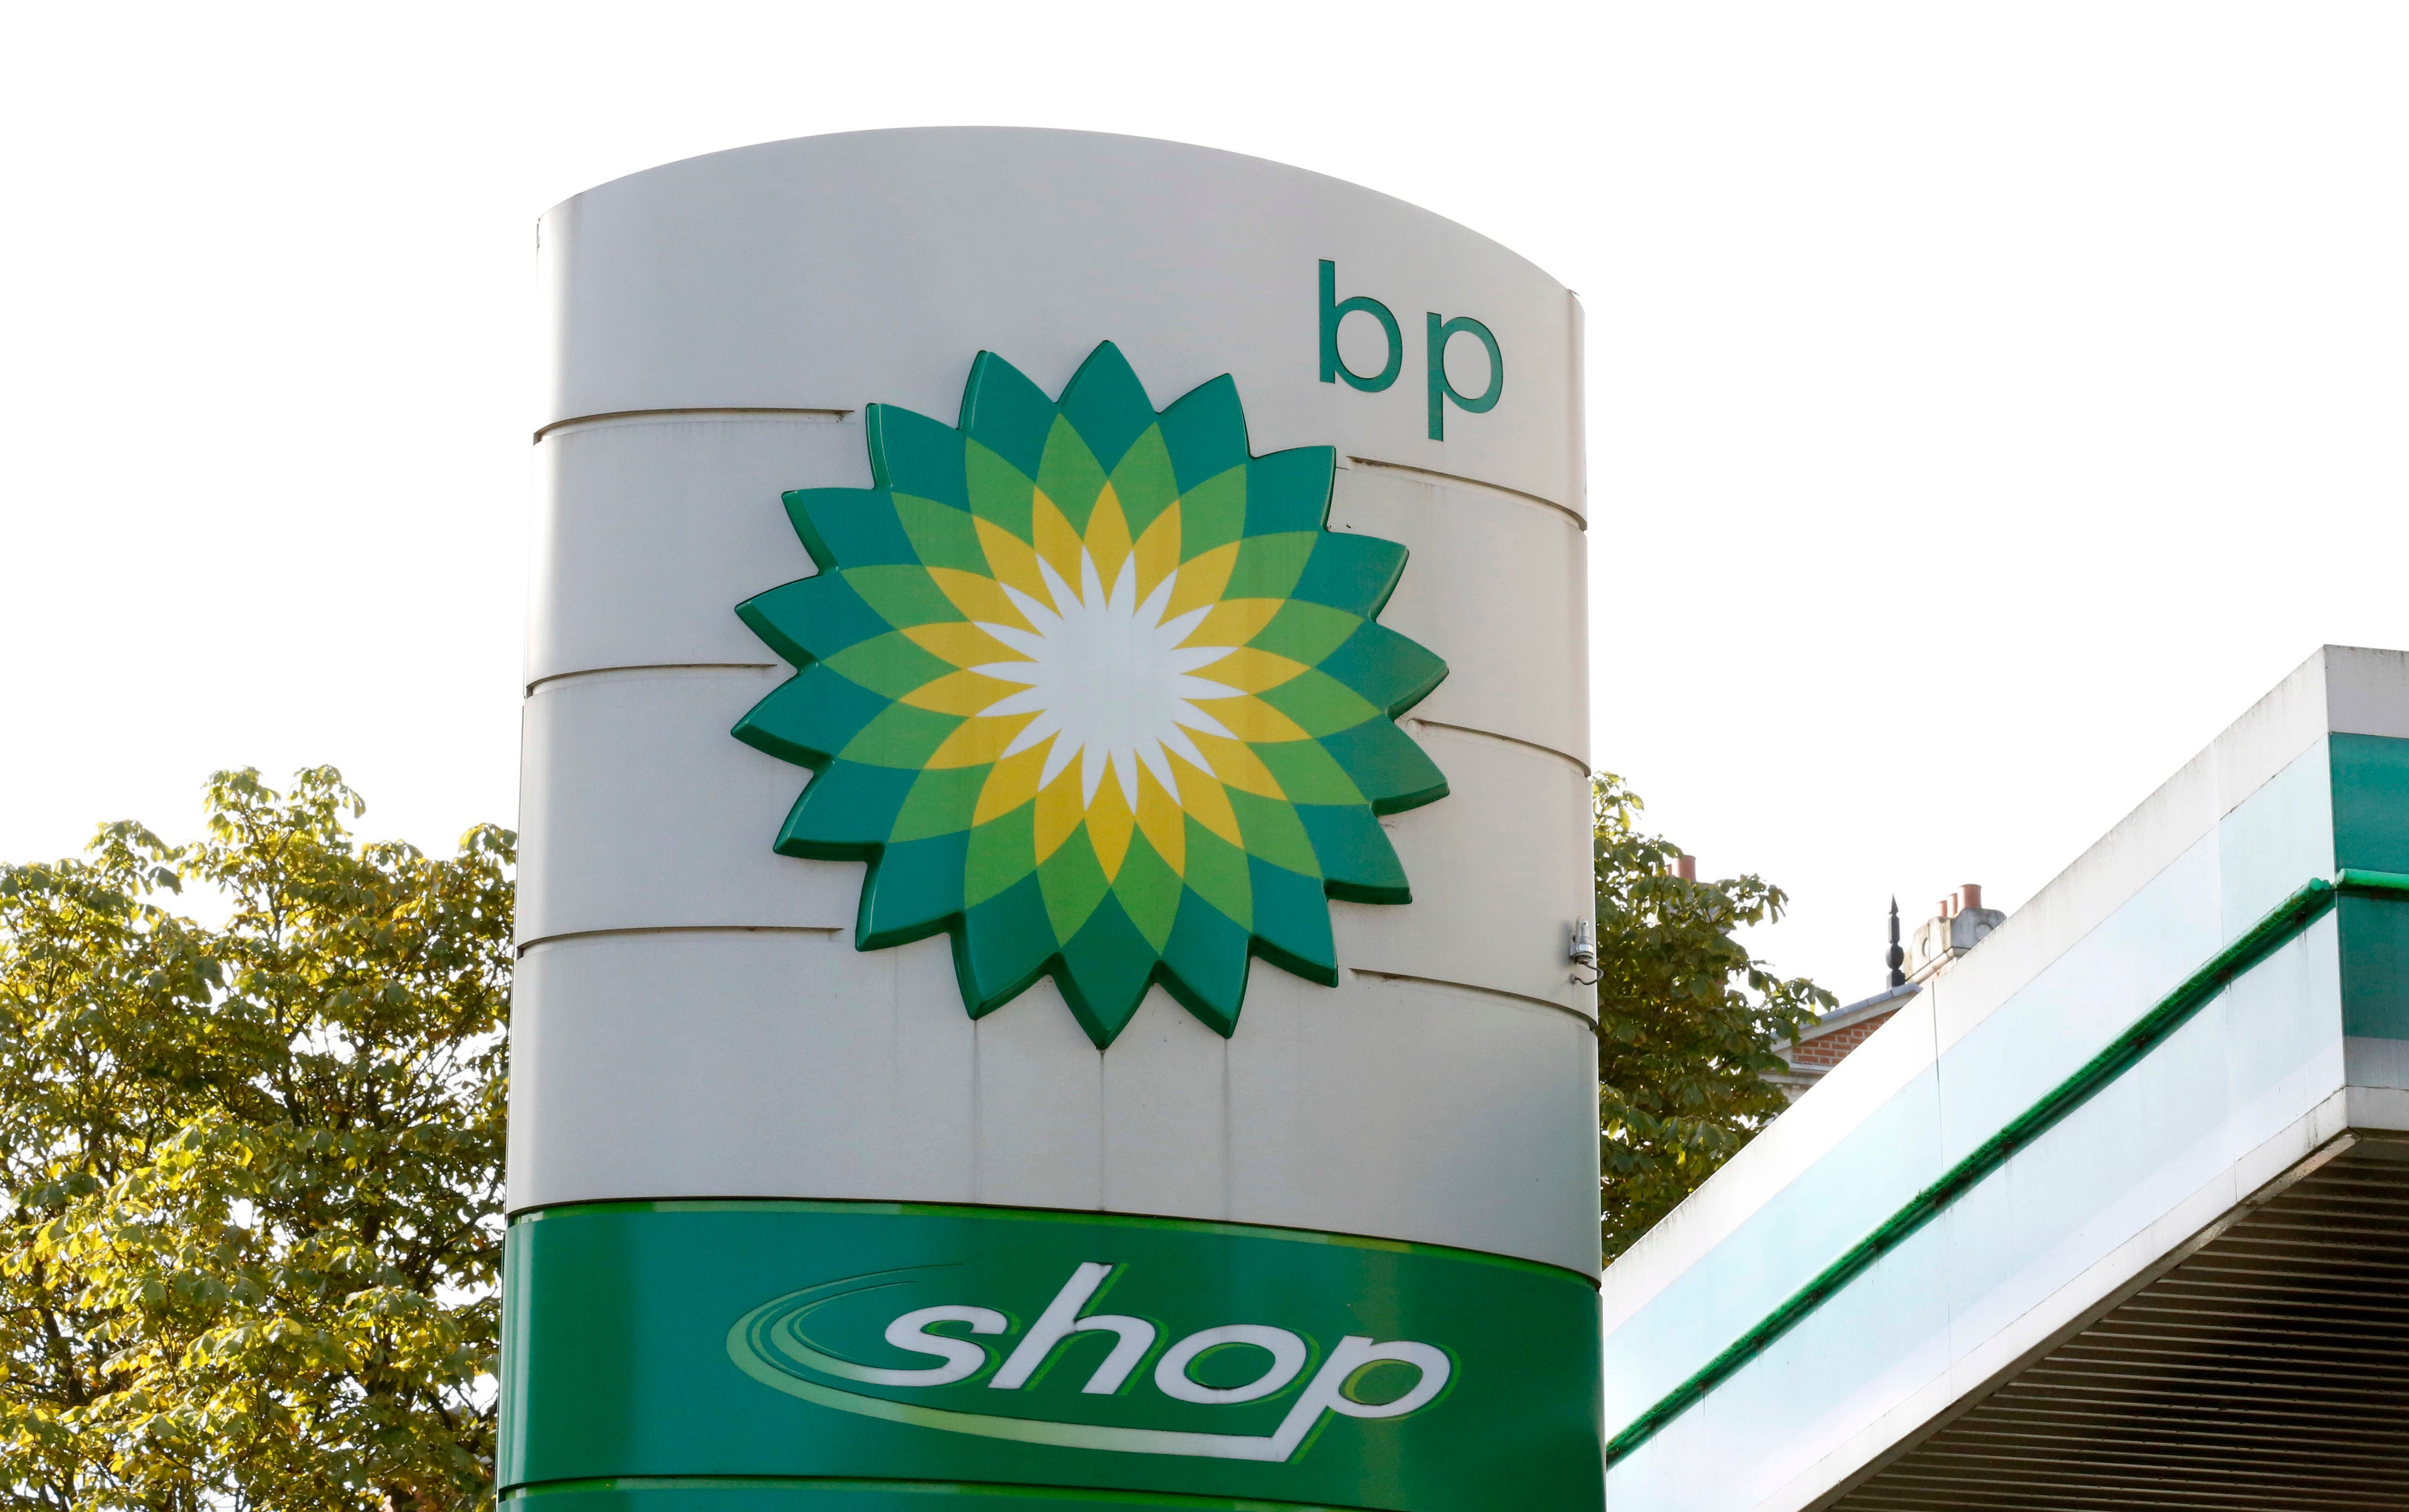 husband of bp worker pleads guilty in insider trading case after listening to wife's work calls, feds say